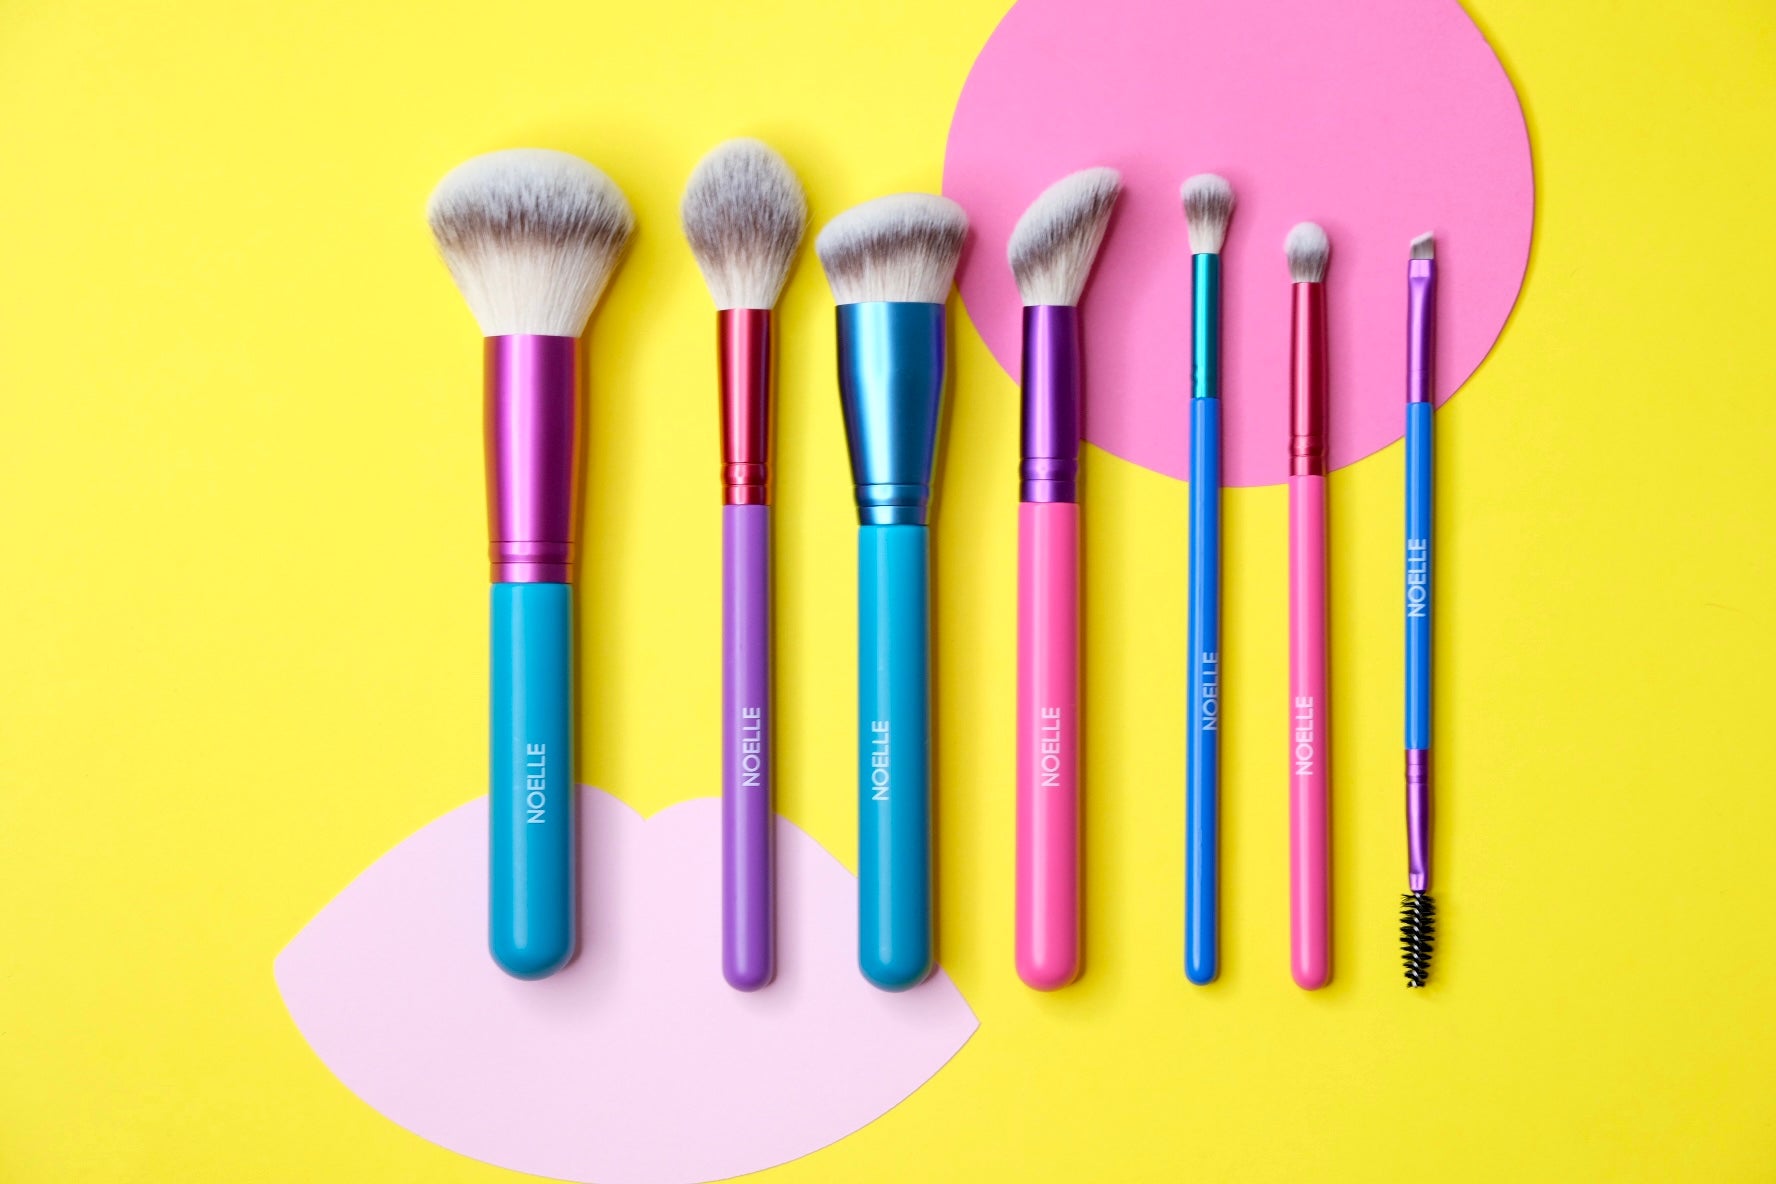 Say hello to Candy set, your new makeup bestie